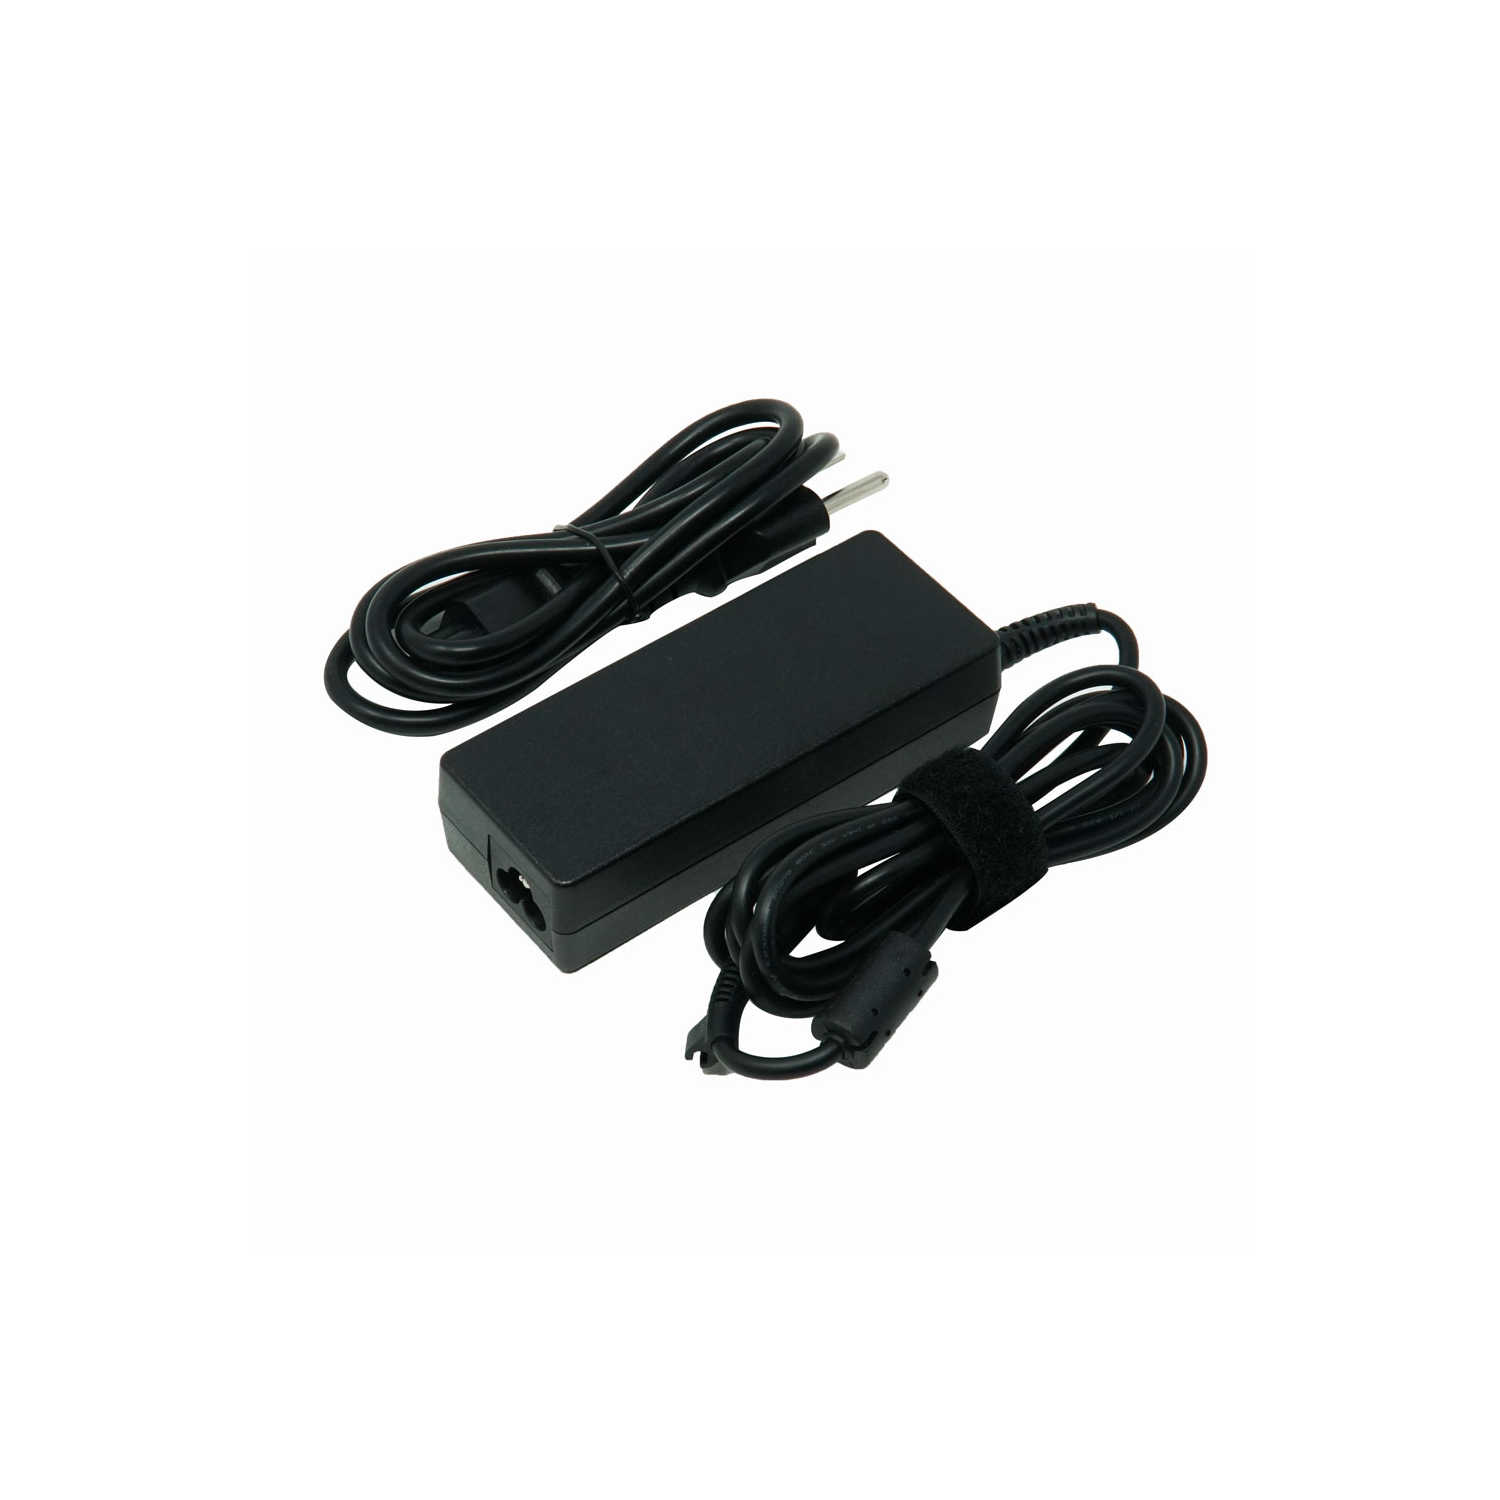 Dr. Battery - Notebook Adapter for HP EliteBook 8570p / Folio 9470 / 9470m / 463552-004 / 463553-001 - Free Shipping